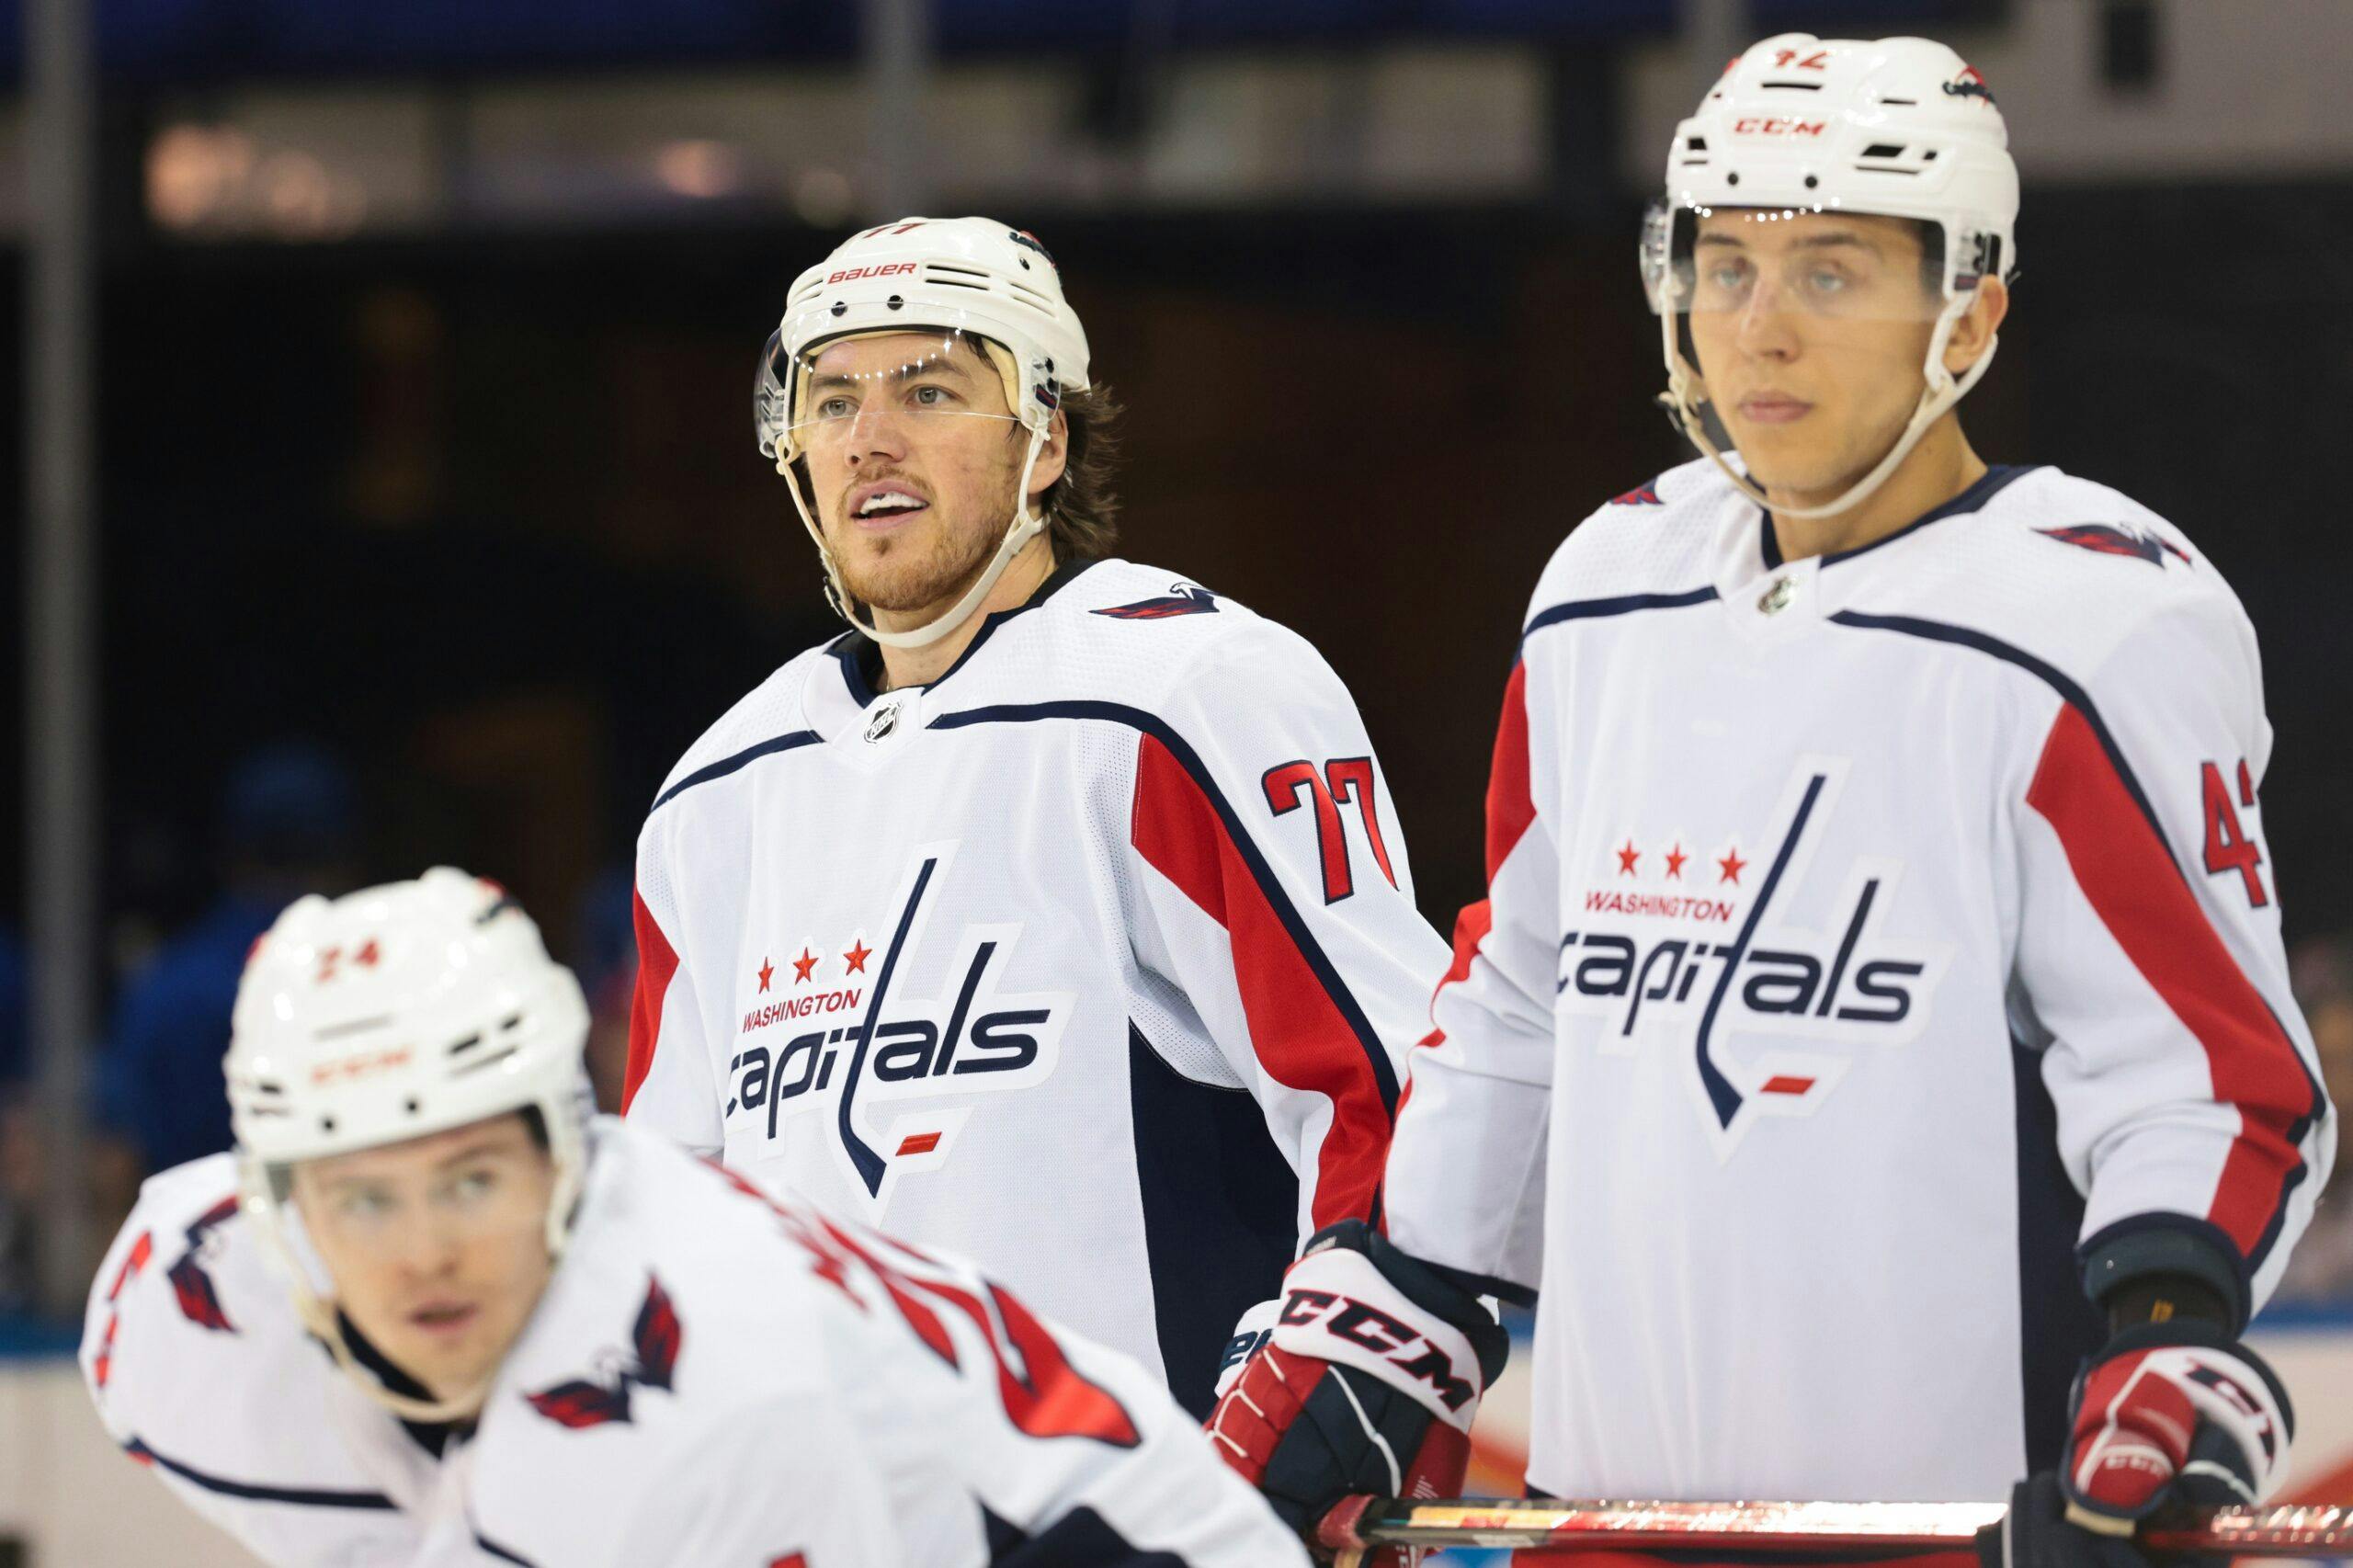 Washington Capitals re-sign Connor McMichael to two-year, $4.2 million contract